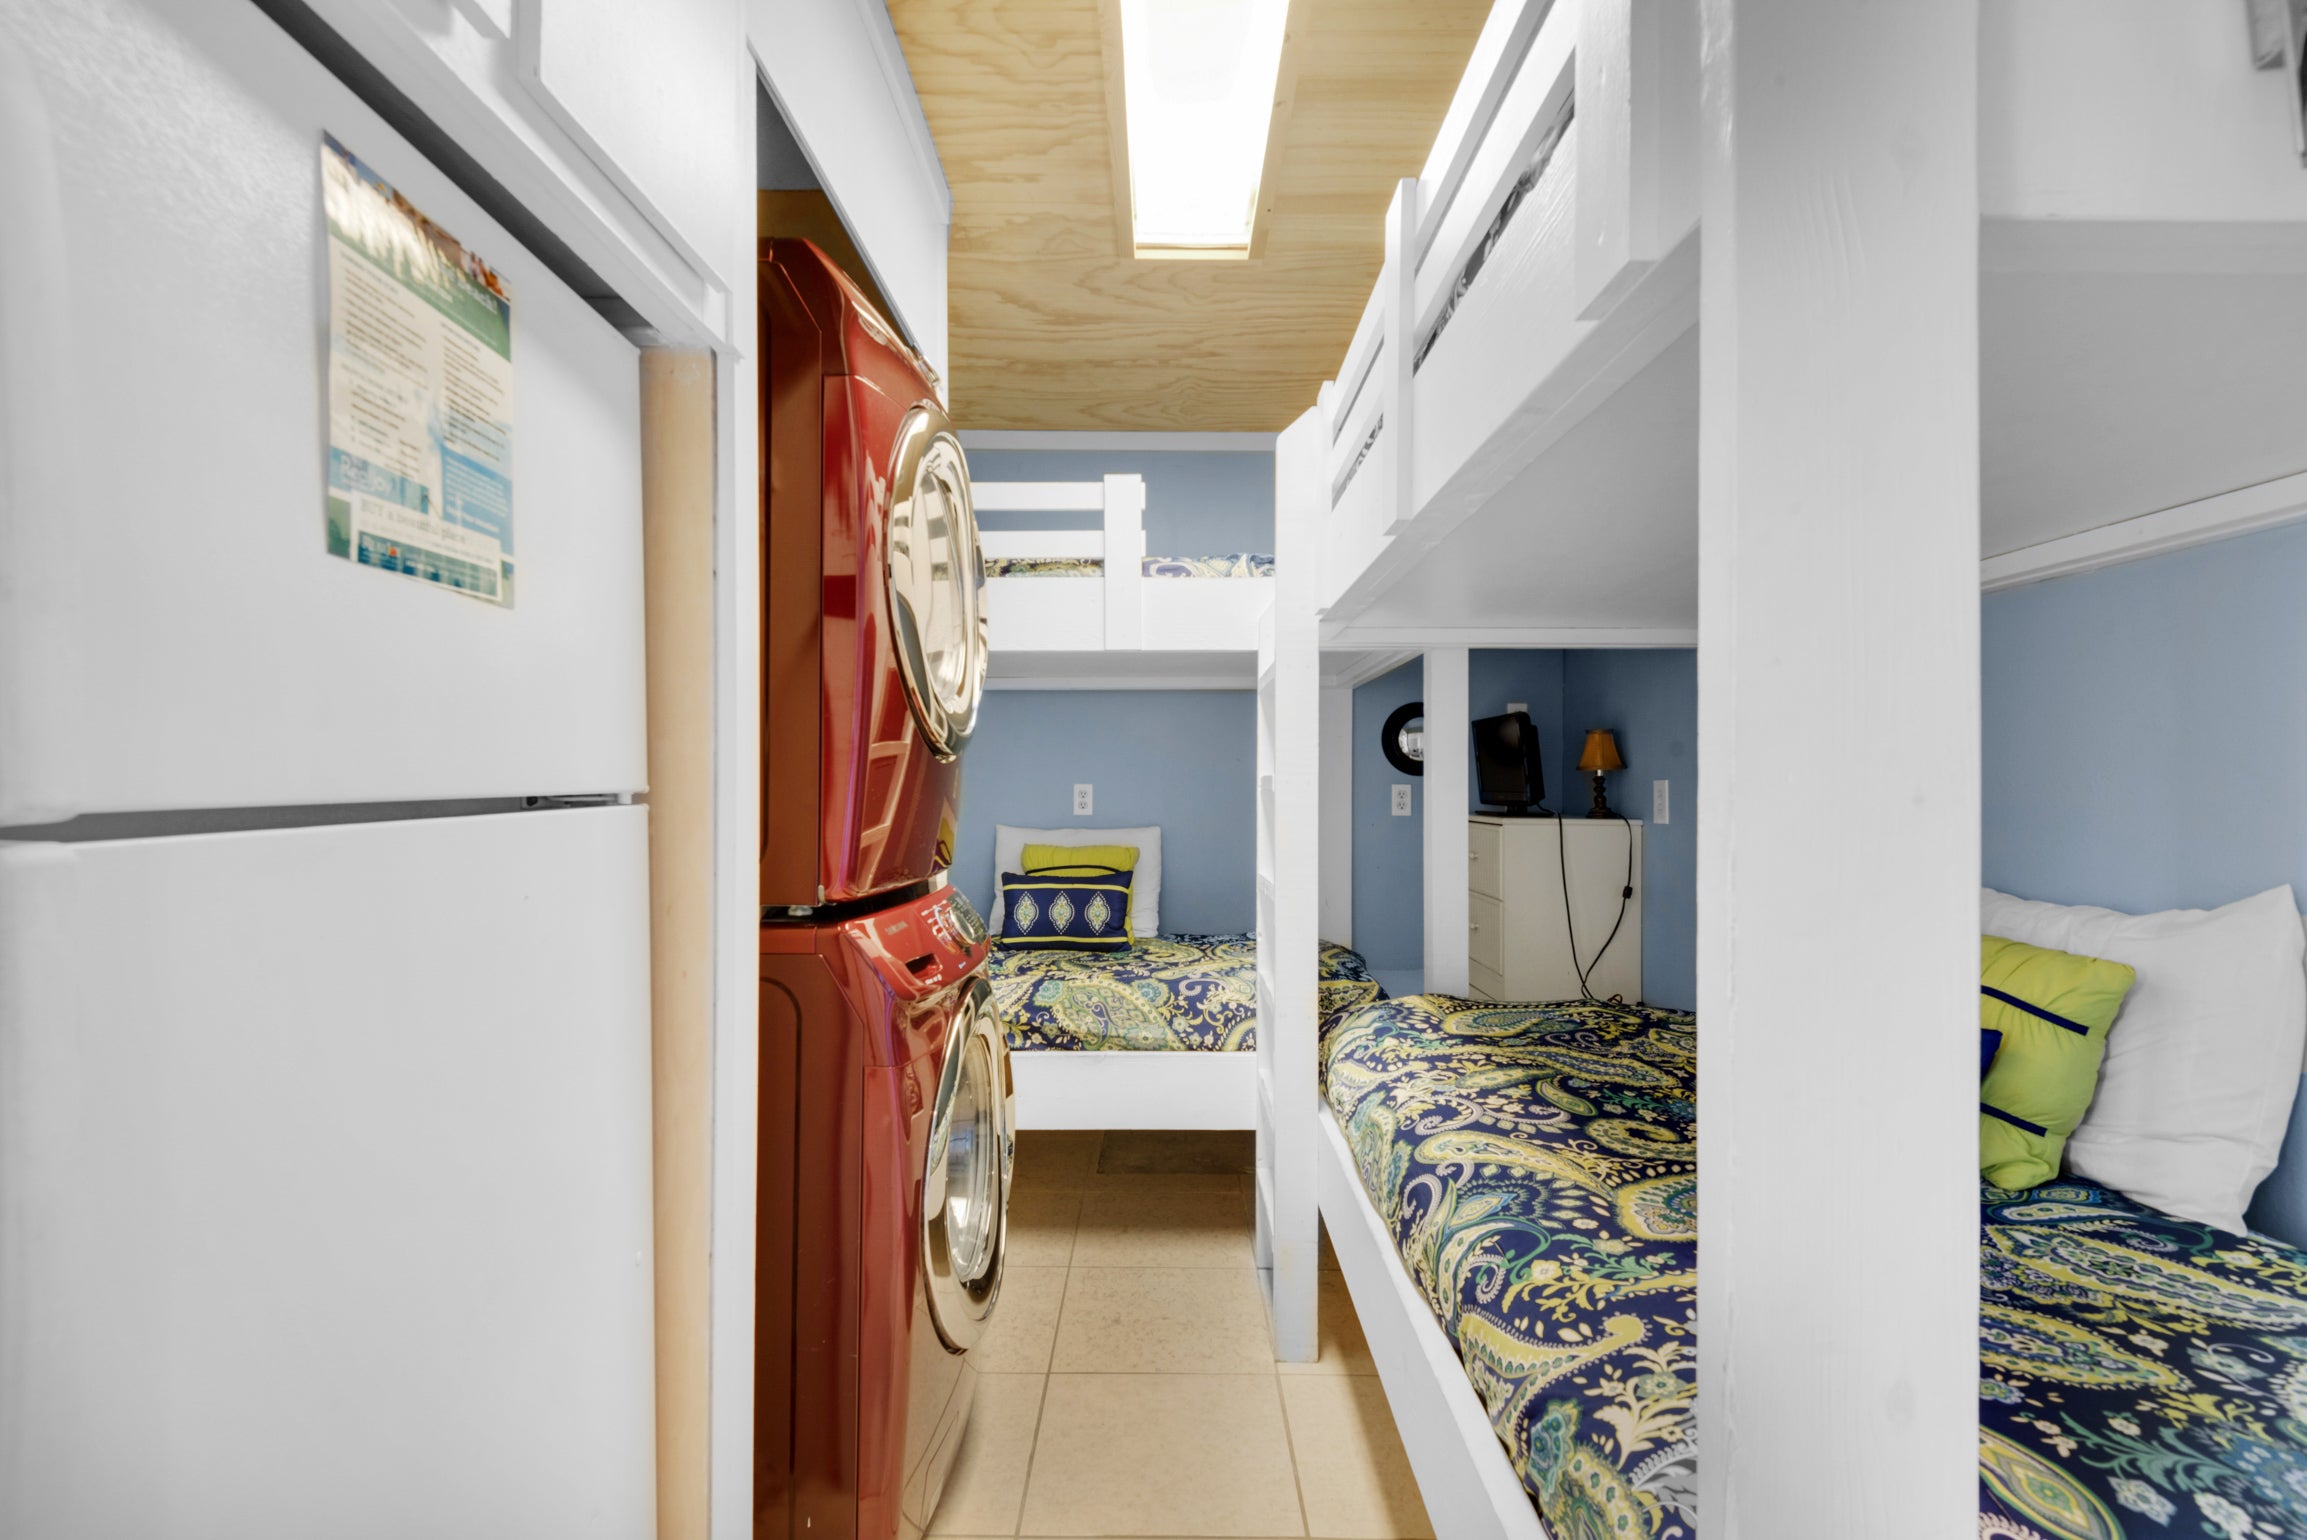 Bunk room with washer and dryer